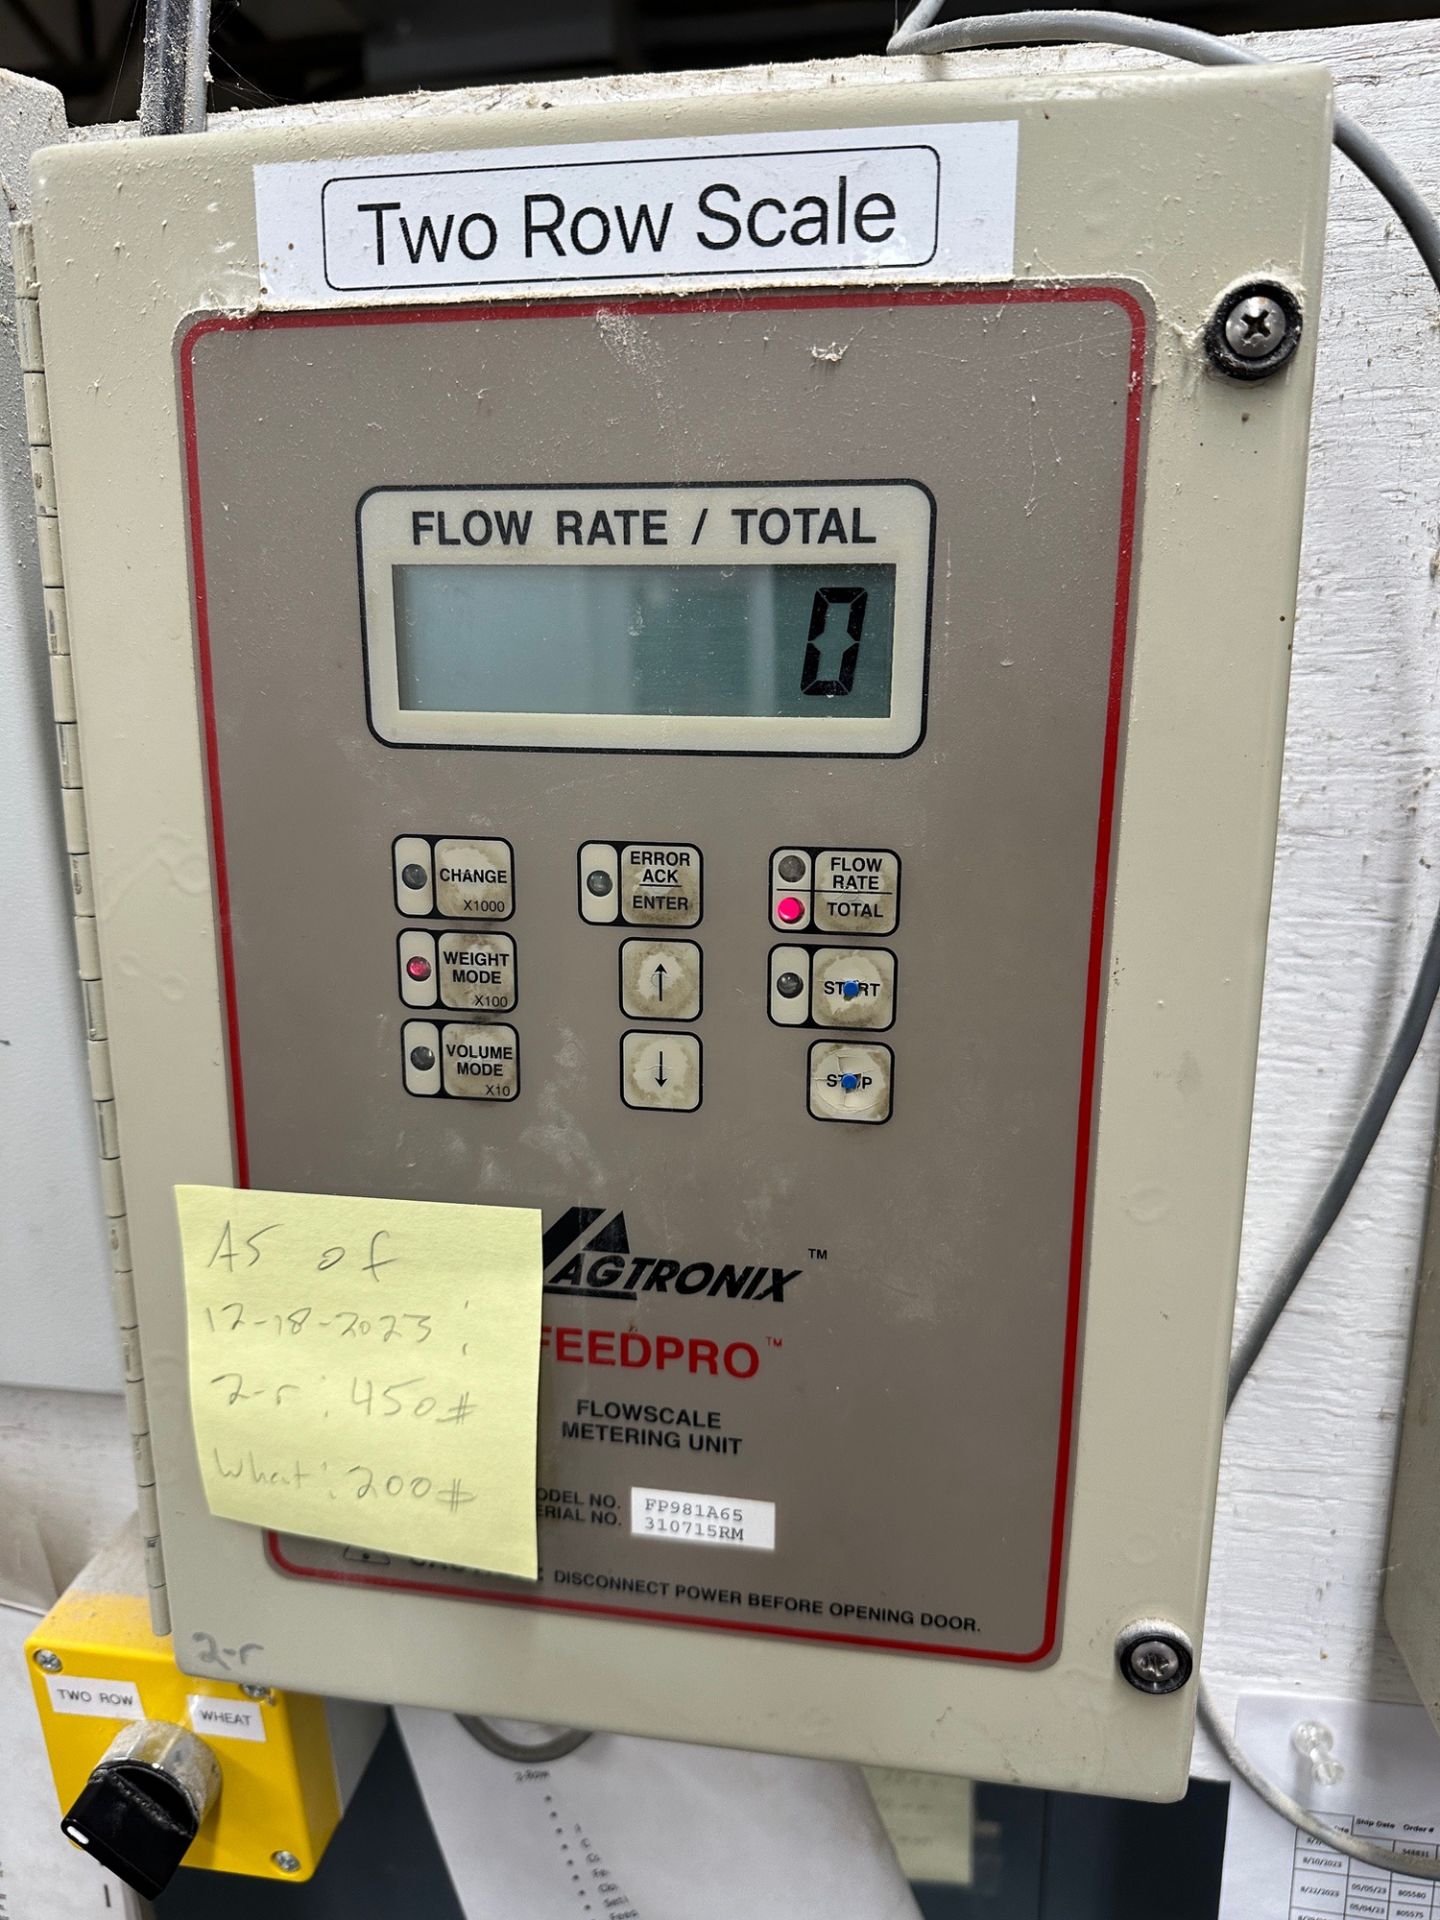 Agtronix Feedpro with Flowscale Metering Unit (2 Row) - Model FP981A65 - S/N 310715 | Rig Fee $500 - Image 3 of 3